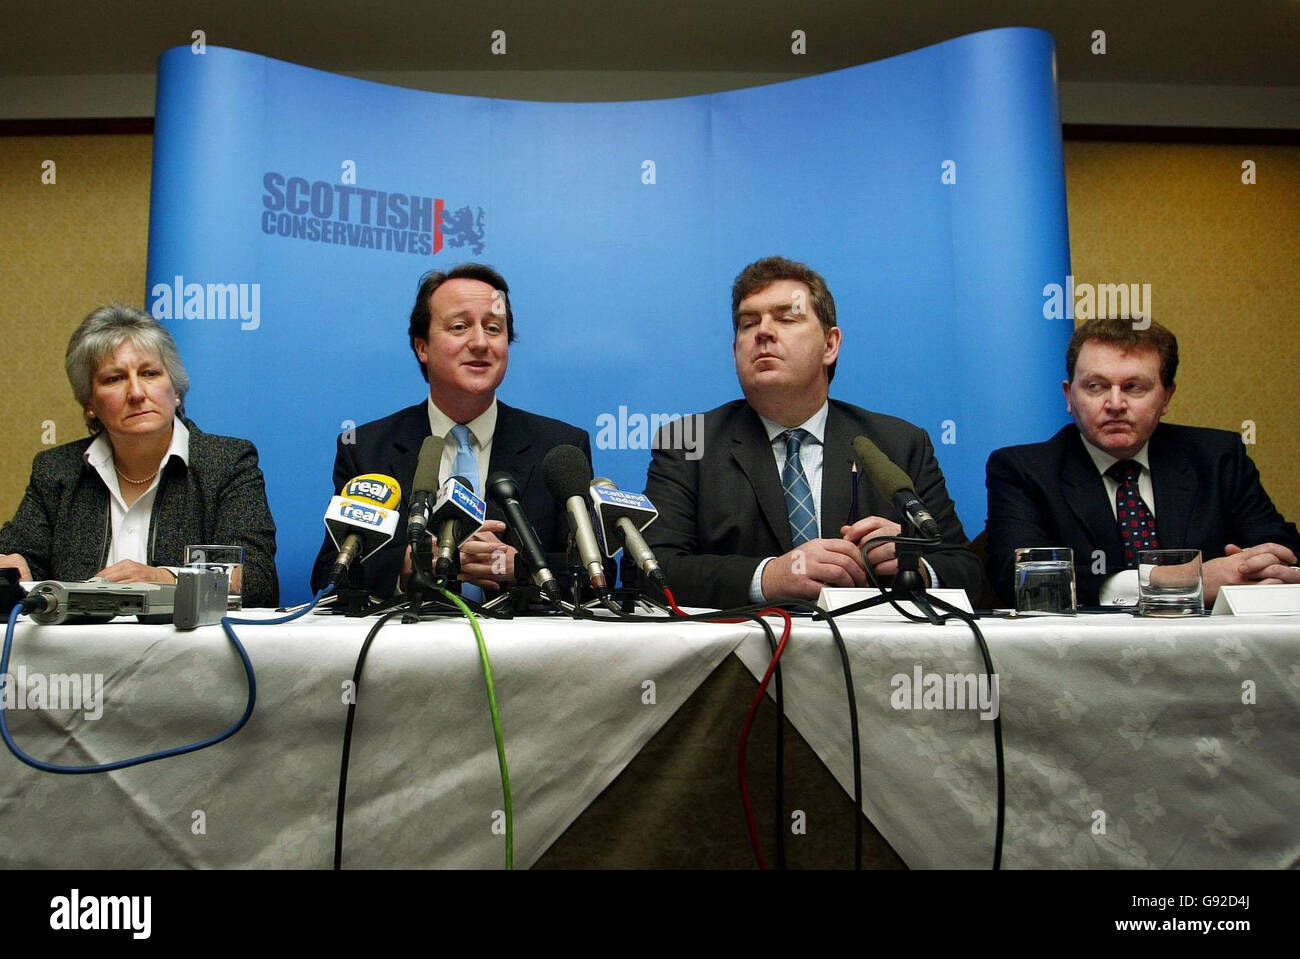 Scottish Conservative Leader Annabell Goldie (left to right), Conservative leader David Cameron, Peter Duncan and David Mondel Stock Photo